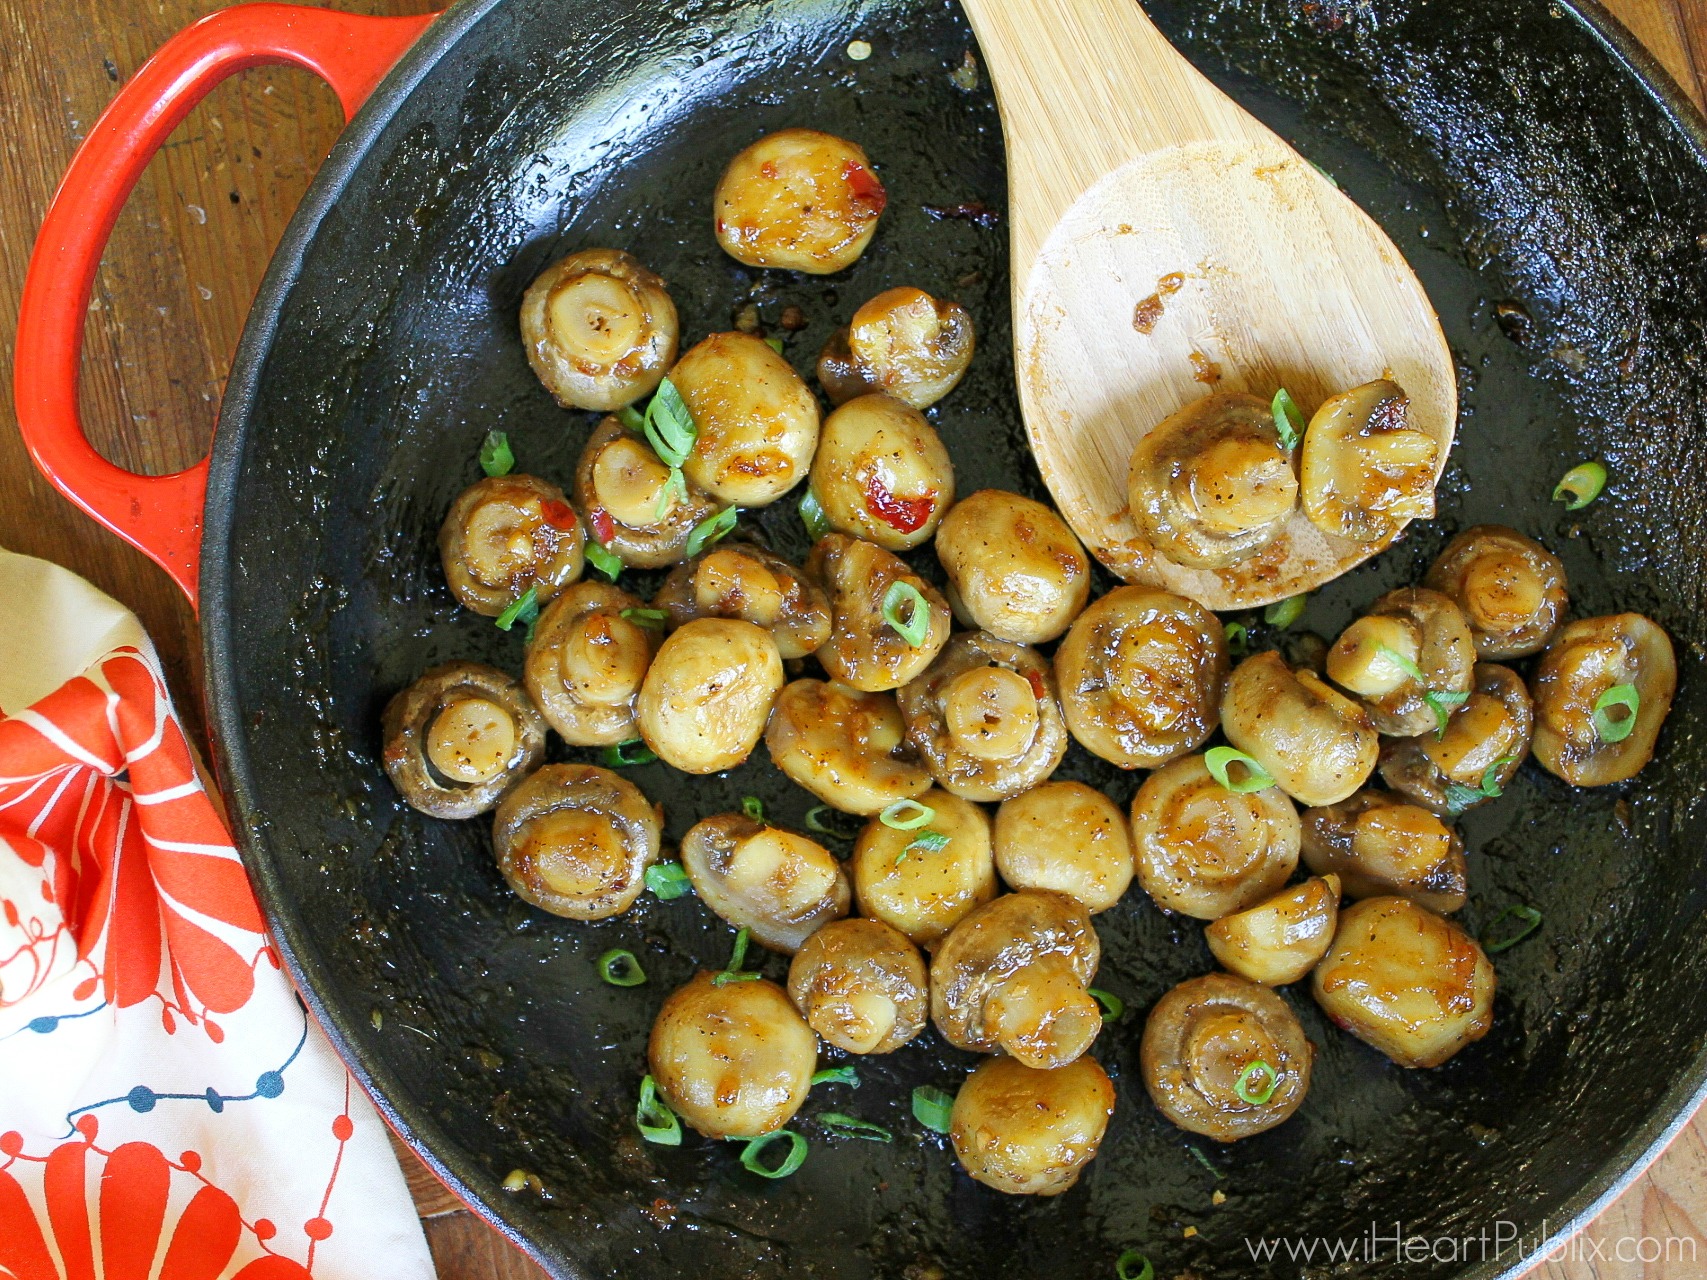 Sweet Chili Glazed Mushrooms - Delicious Recipe For The I Can't Believe It's Not Butter! BOGO Sale on I Heart Publix 1